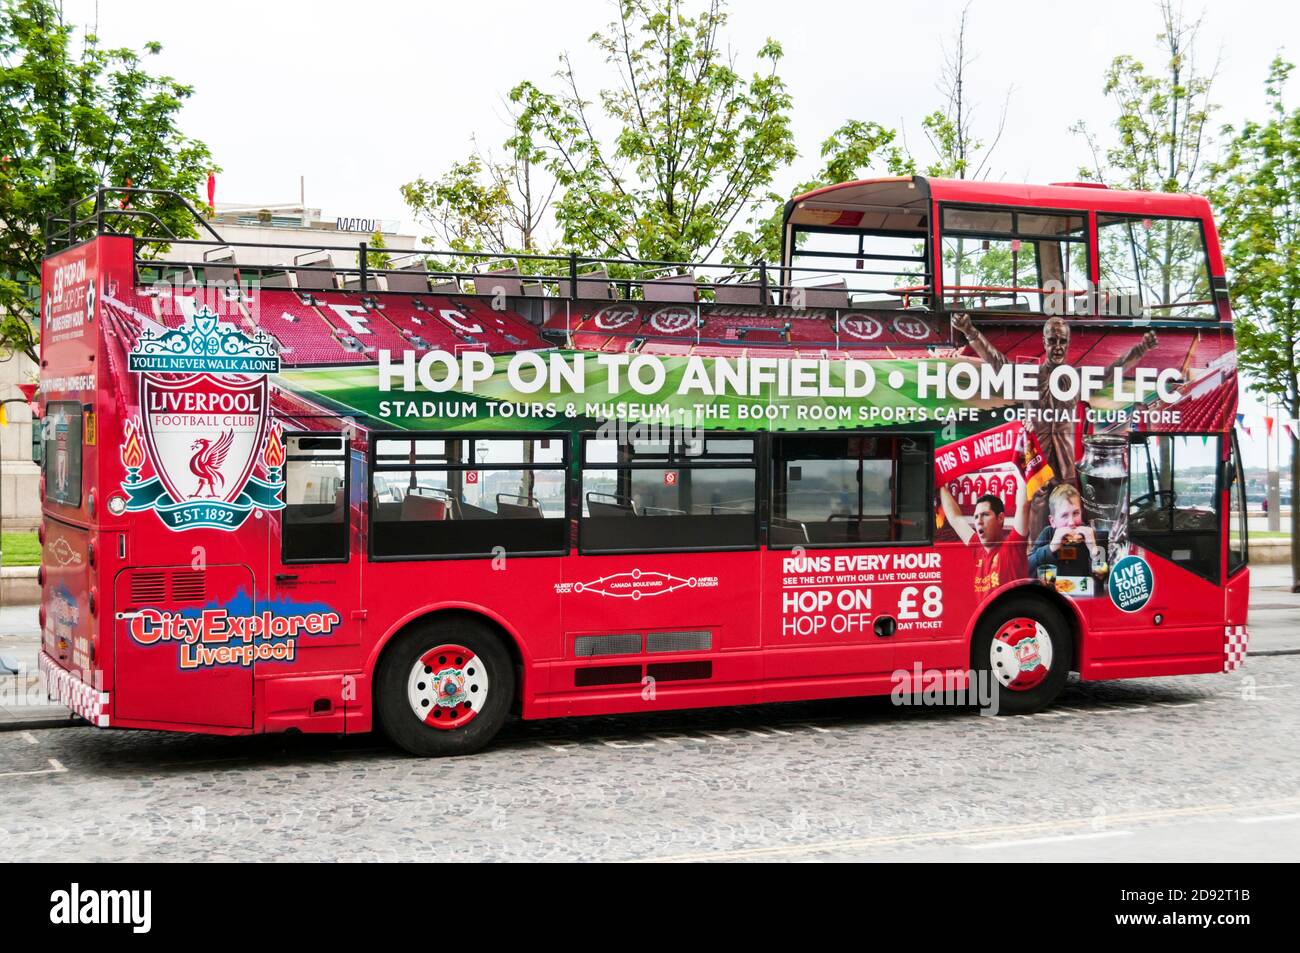 Liverpool Football Club Hop-on-Hop-off Sightseeing-Bus nach Anfield. Stockfoto